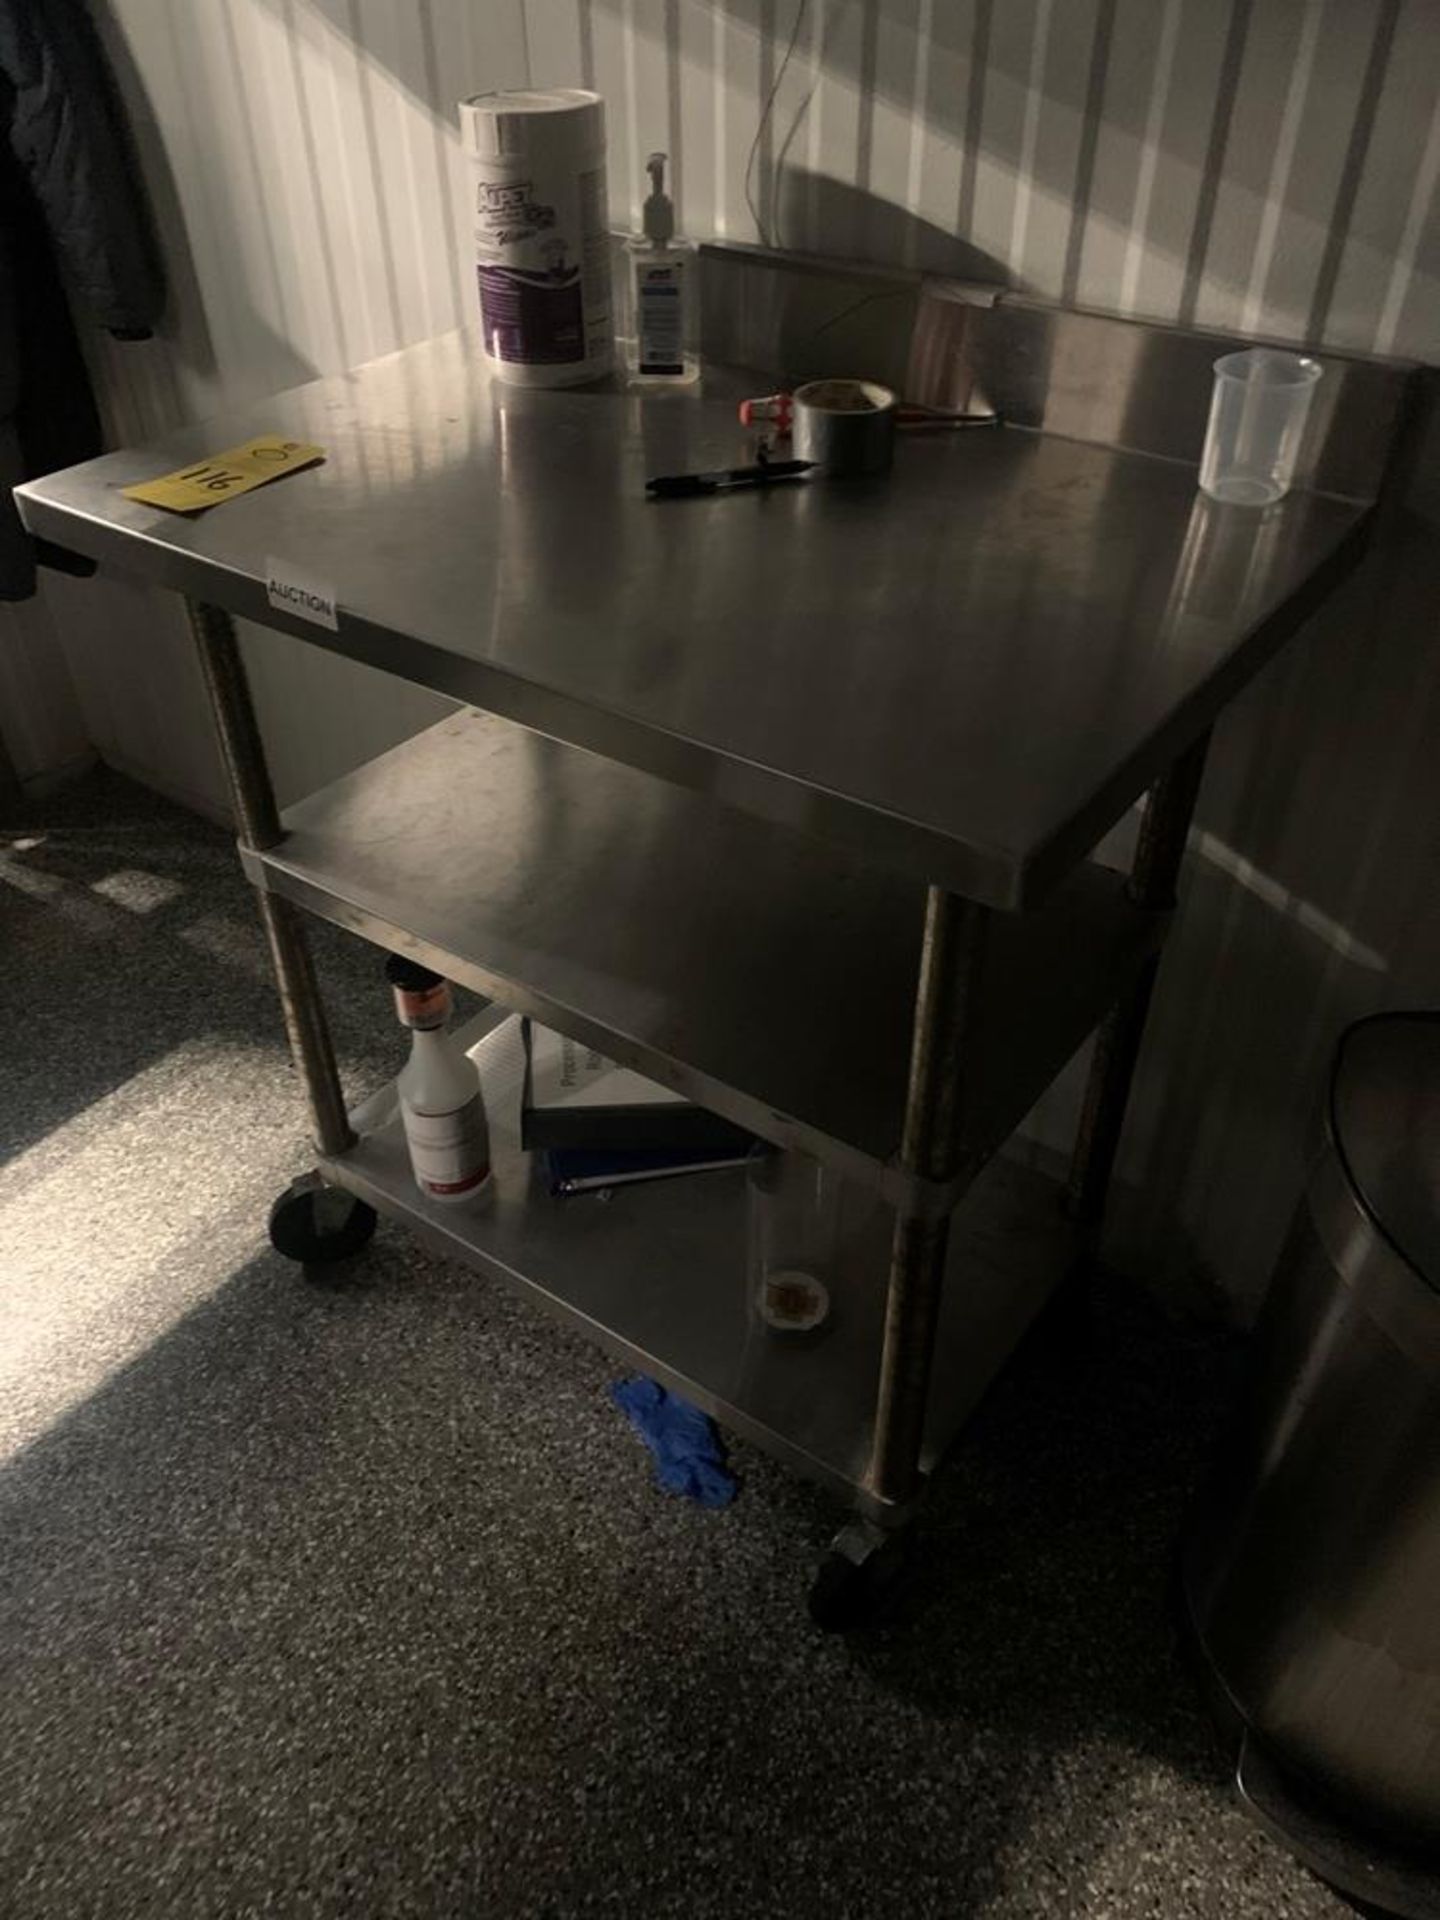 Stainless Steel Table with (2) shelves, 36" X 29" X 38.5" with 4" backsplash - Image 2 of 3